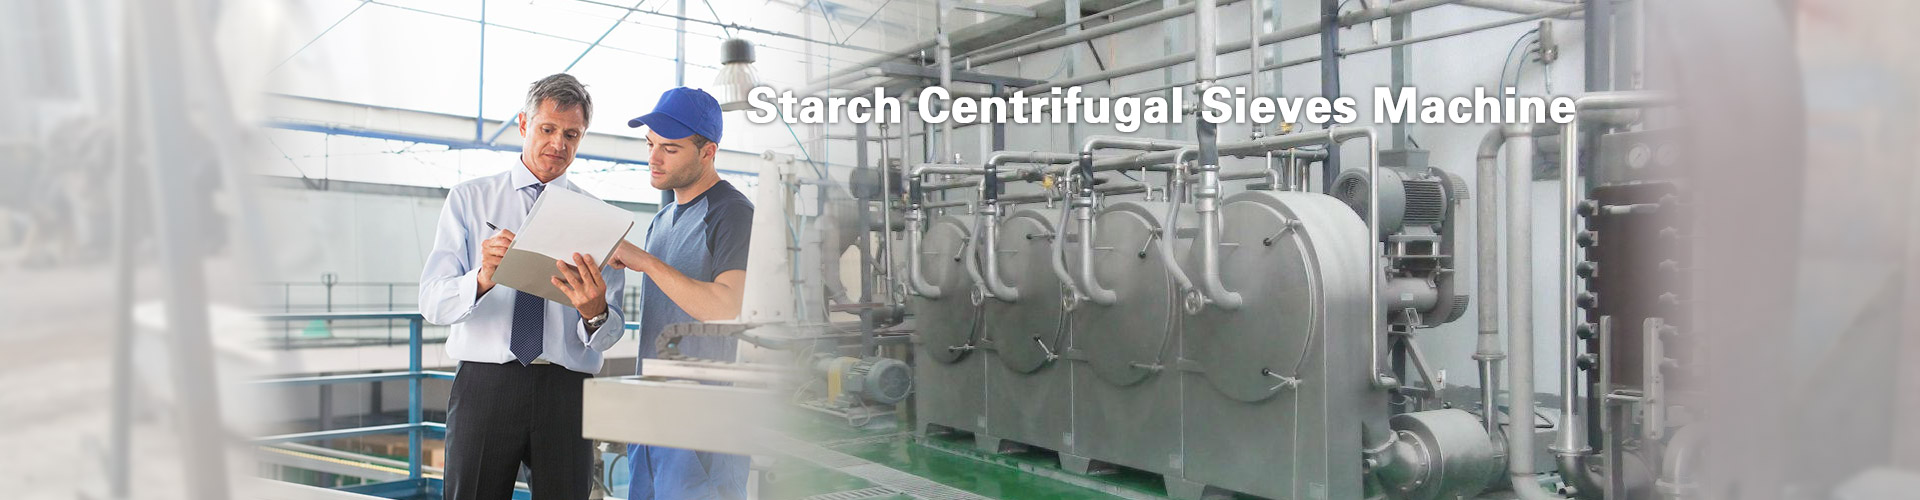 Starch Centrifugal Sieves| Starch Production Machine